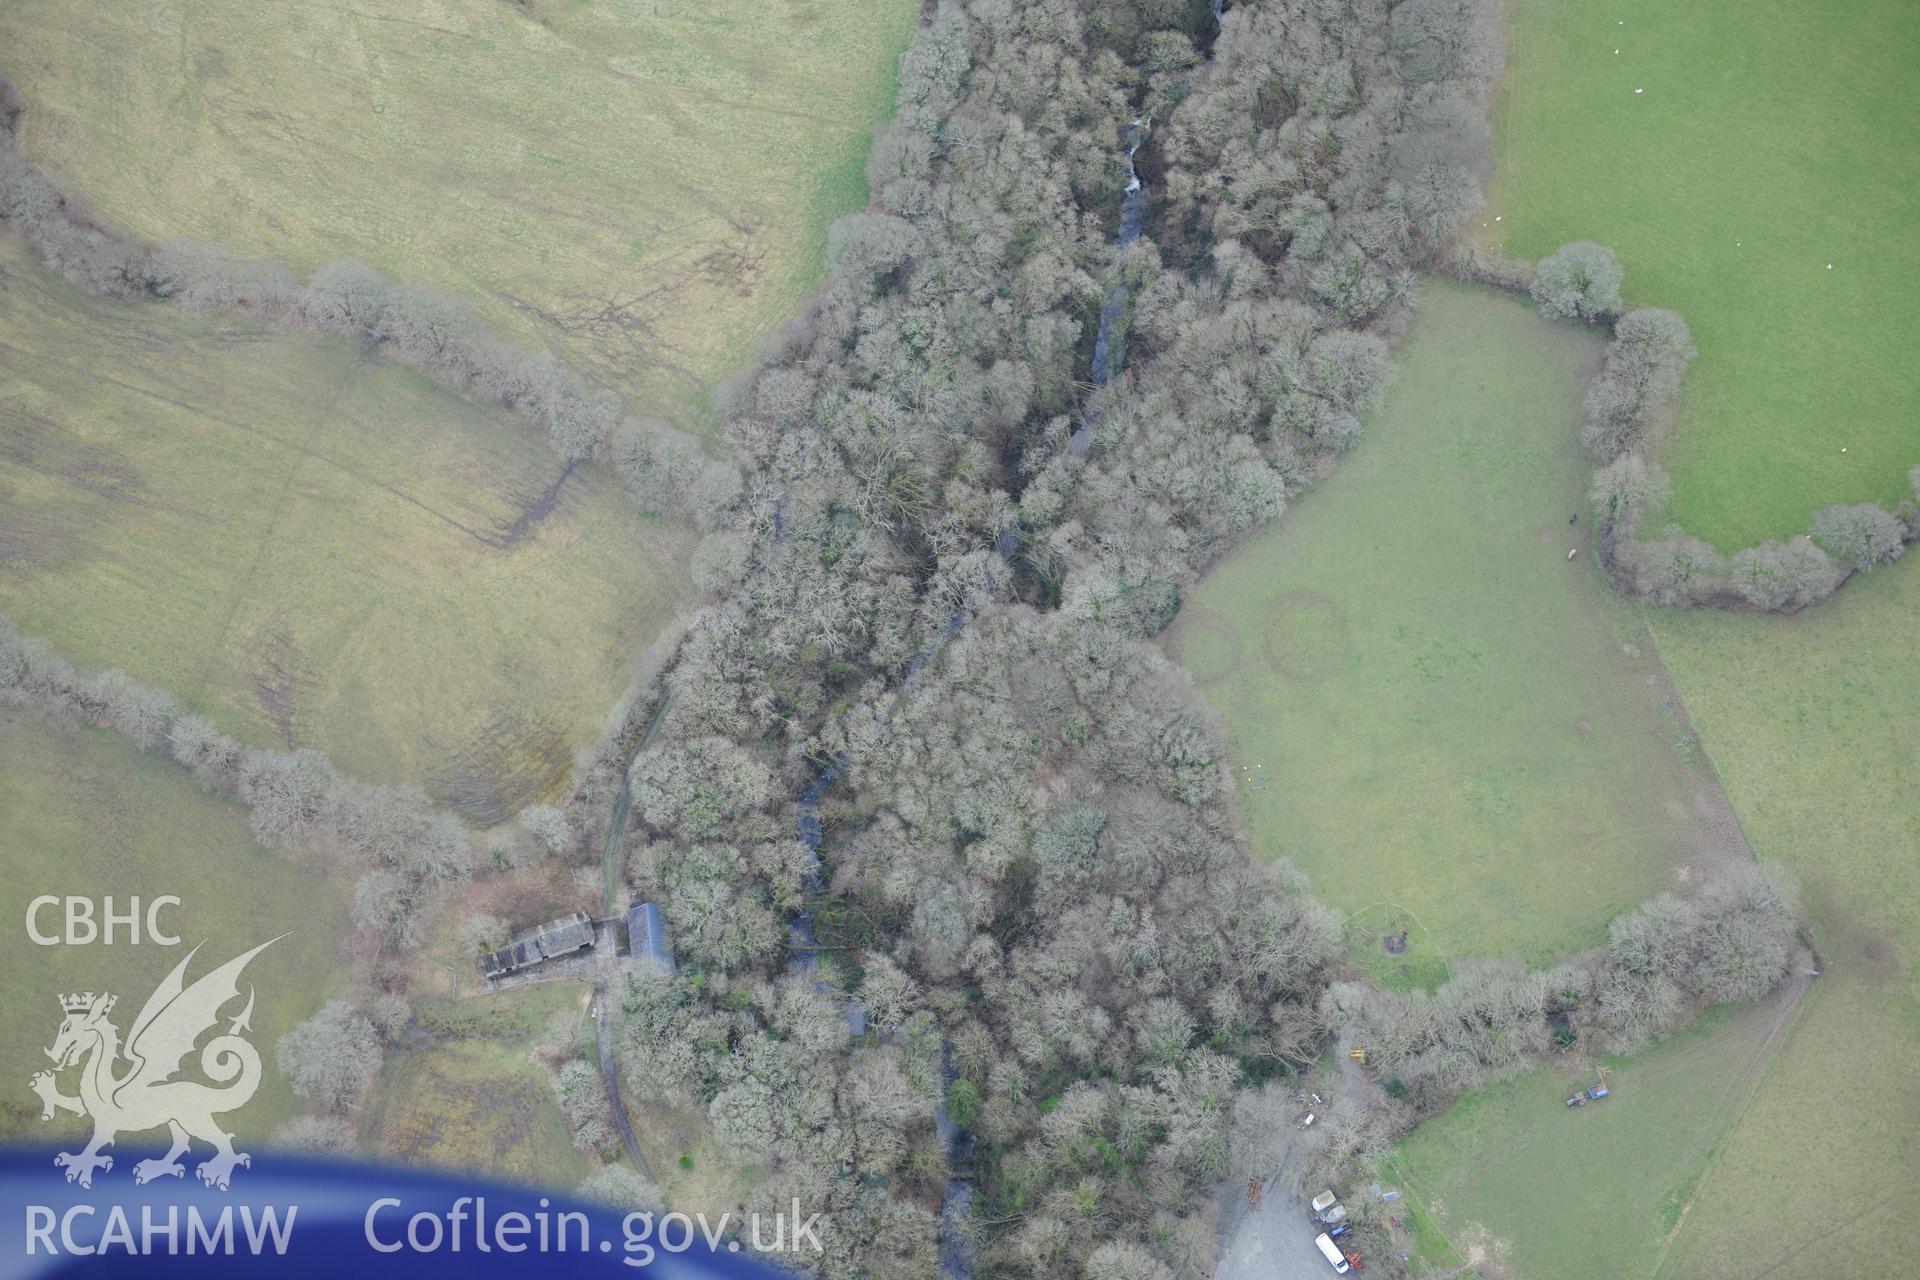 Castell Felin-Cwrrws promontory fort near Aberbanc, Llandysul. Oblique aerial photograph taken during the Royal Commission's programme of archaeological aerial reconnaissance by Toby Driver on 13th March 2015.